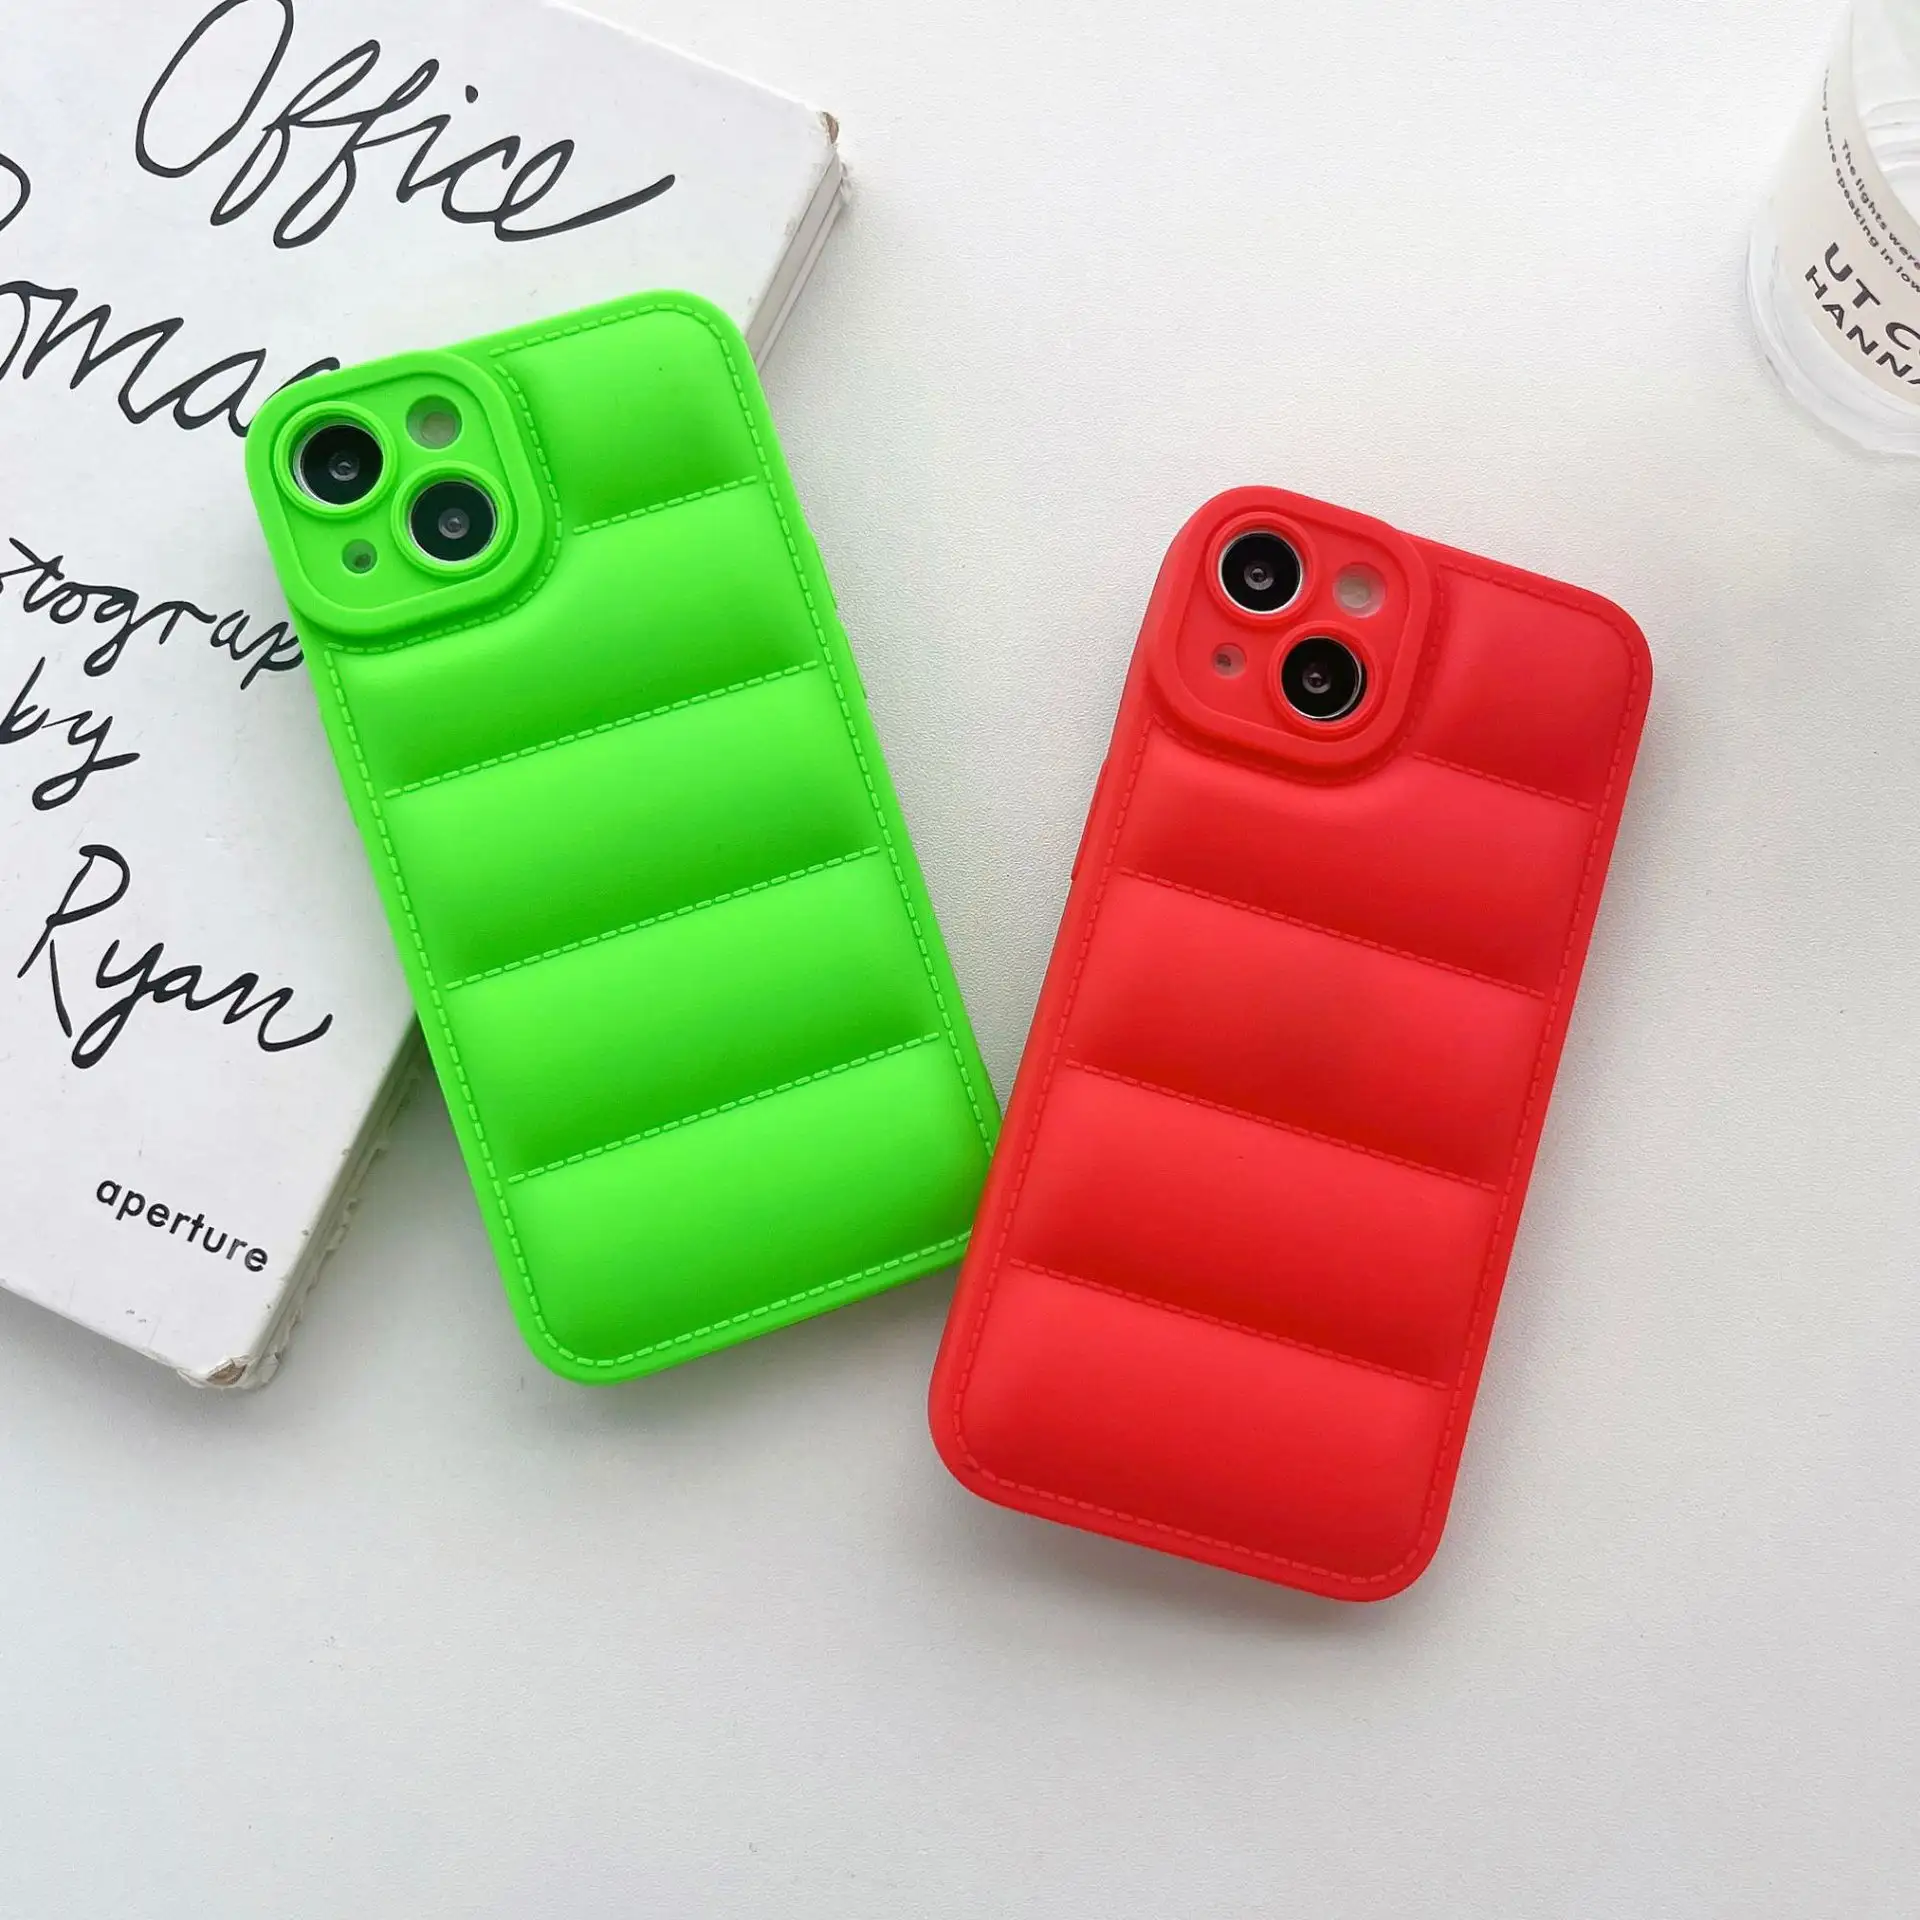 wholesale oem custom smart mobile phone accessories luxury designer north face cute phone case covers for cell phones